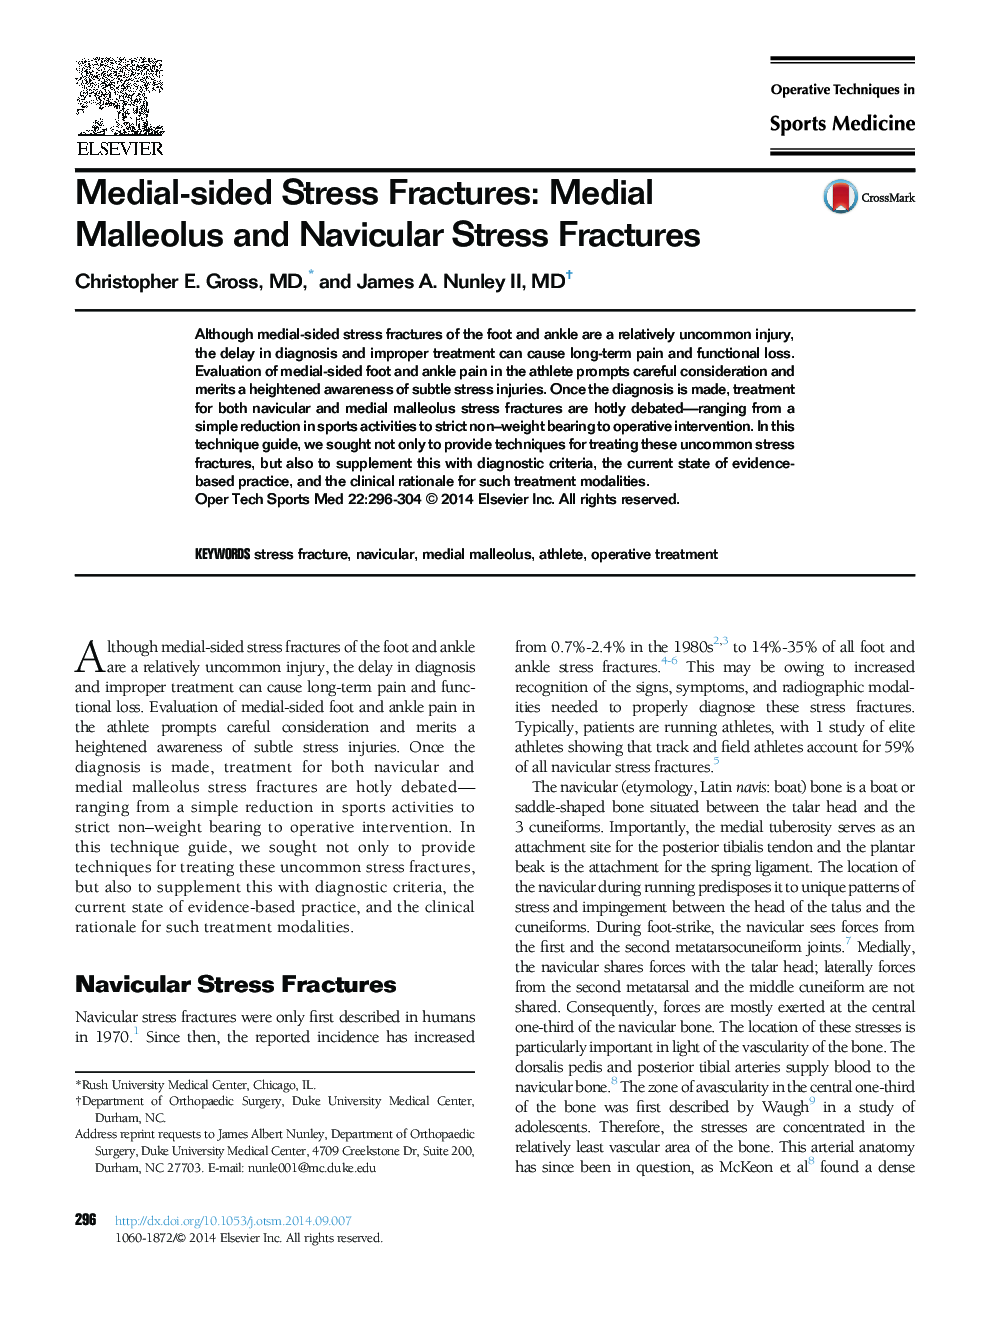 Medial-sided Stress Fractures: Medial Malleolus and Navicular Stress Fractures